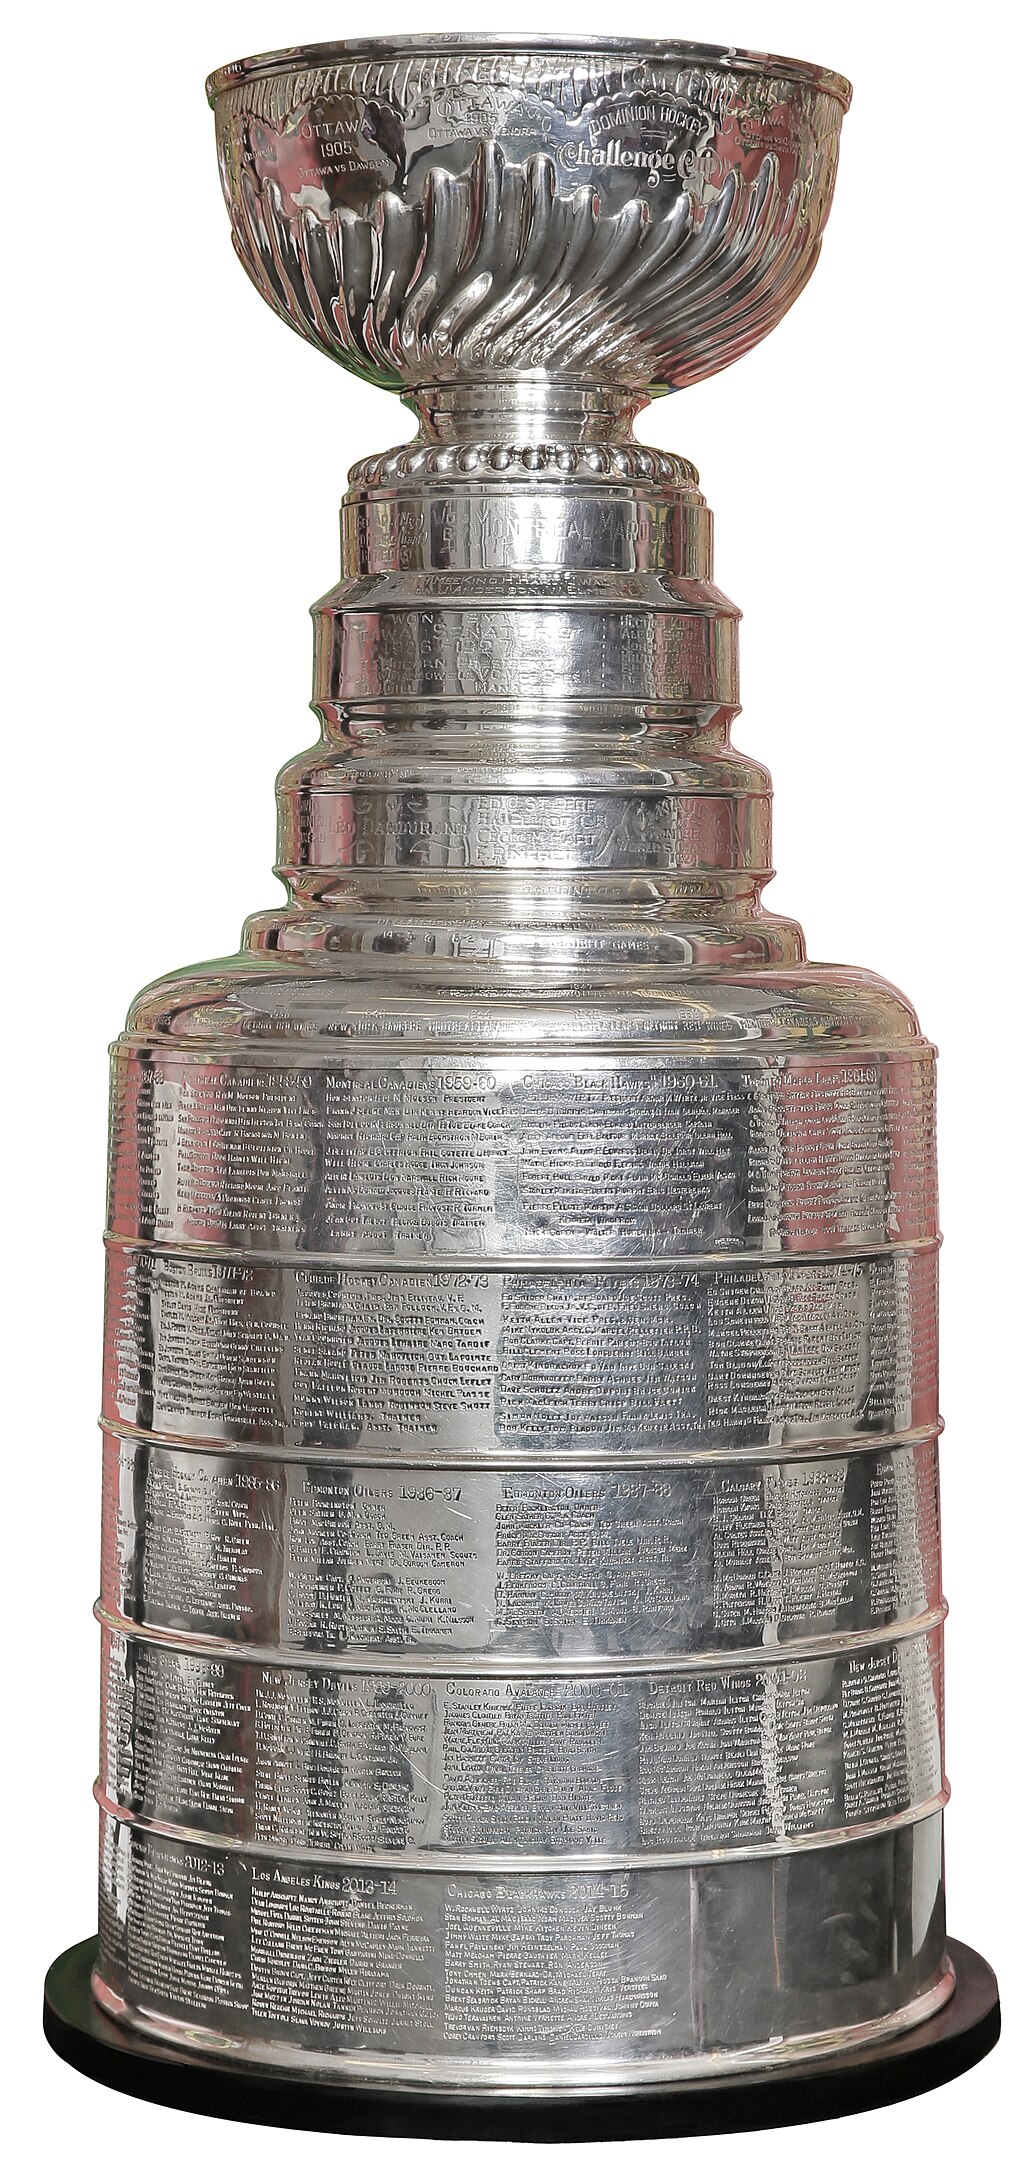 https://upload.wikimedia.org/wikipedia/commons/thumb/4/47/Stanley_Cup%2C_2015.jpg/1024px-Stanley_Cup%2C_2015.jpg